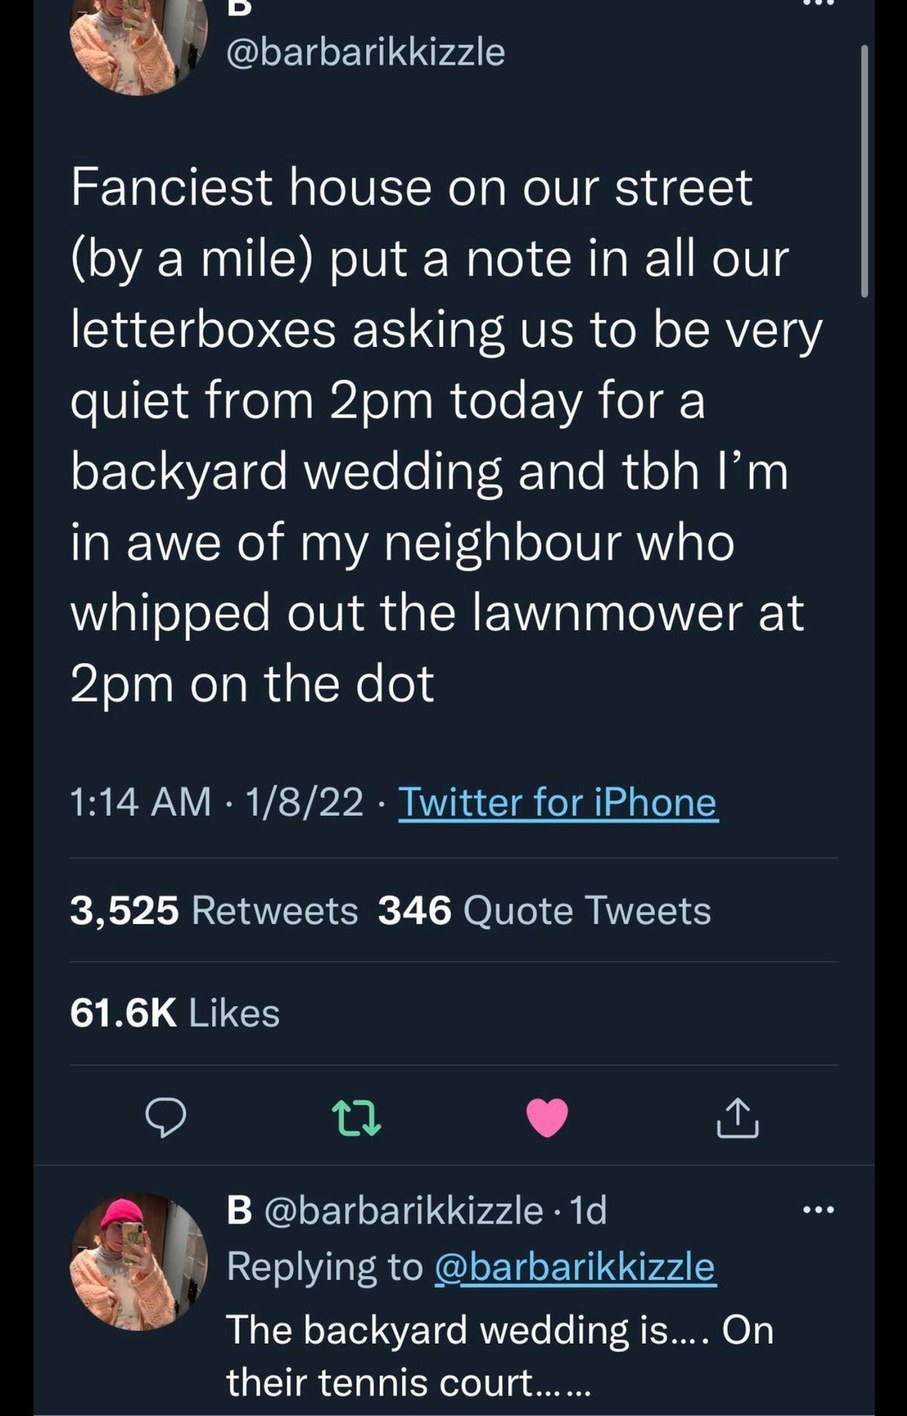 screenshot - Fanciest house on our street by a mile put a note in all our letterboxes asking us to be very quiet from 2pm today for a backyard wedding and tbh I'm in awe of my neighbour who whipped out the lawnmower at 2pm on the dot 1822 Twitter for iPho